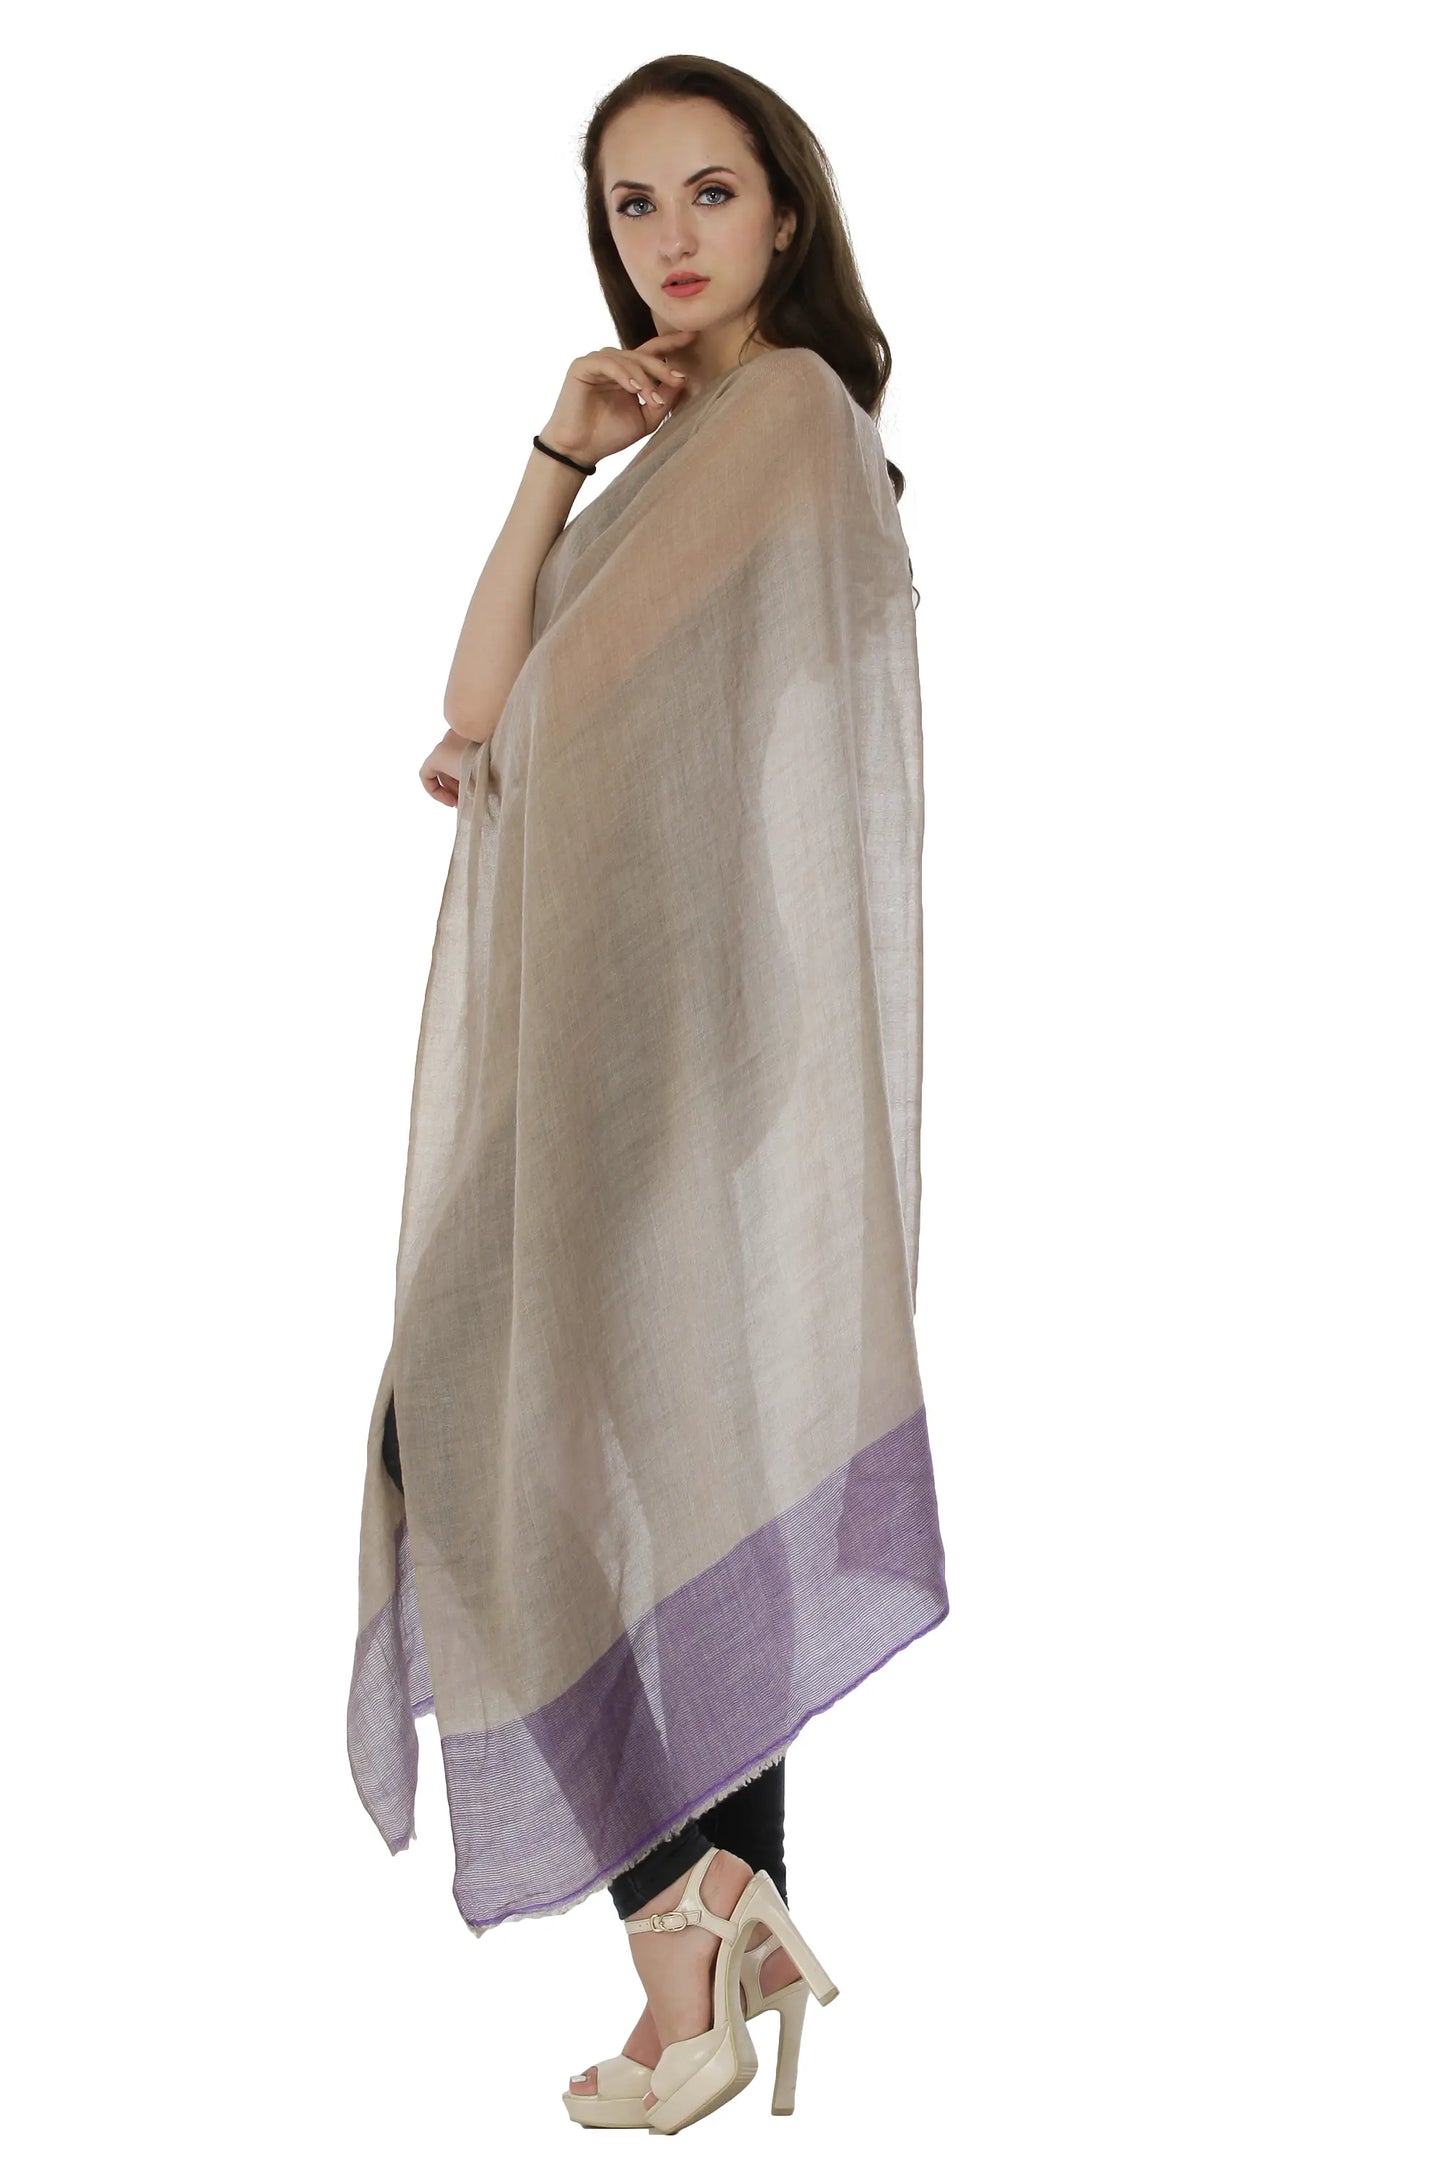 Savannah-Tan Pashmina Woolen Stole With Contrast Purple Broad Border From Nepal